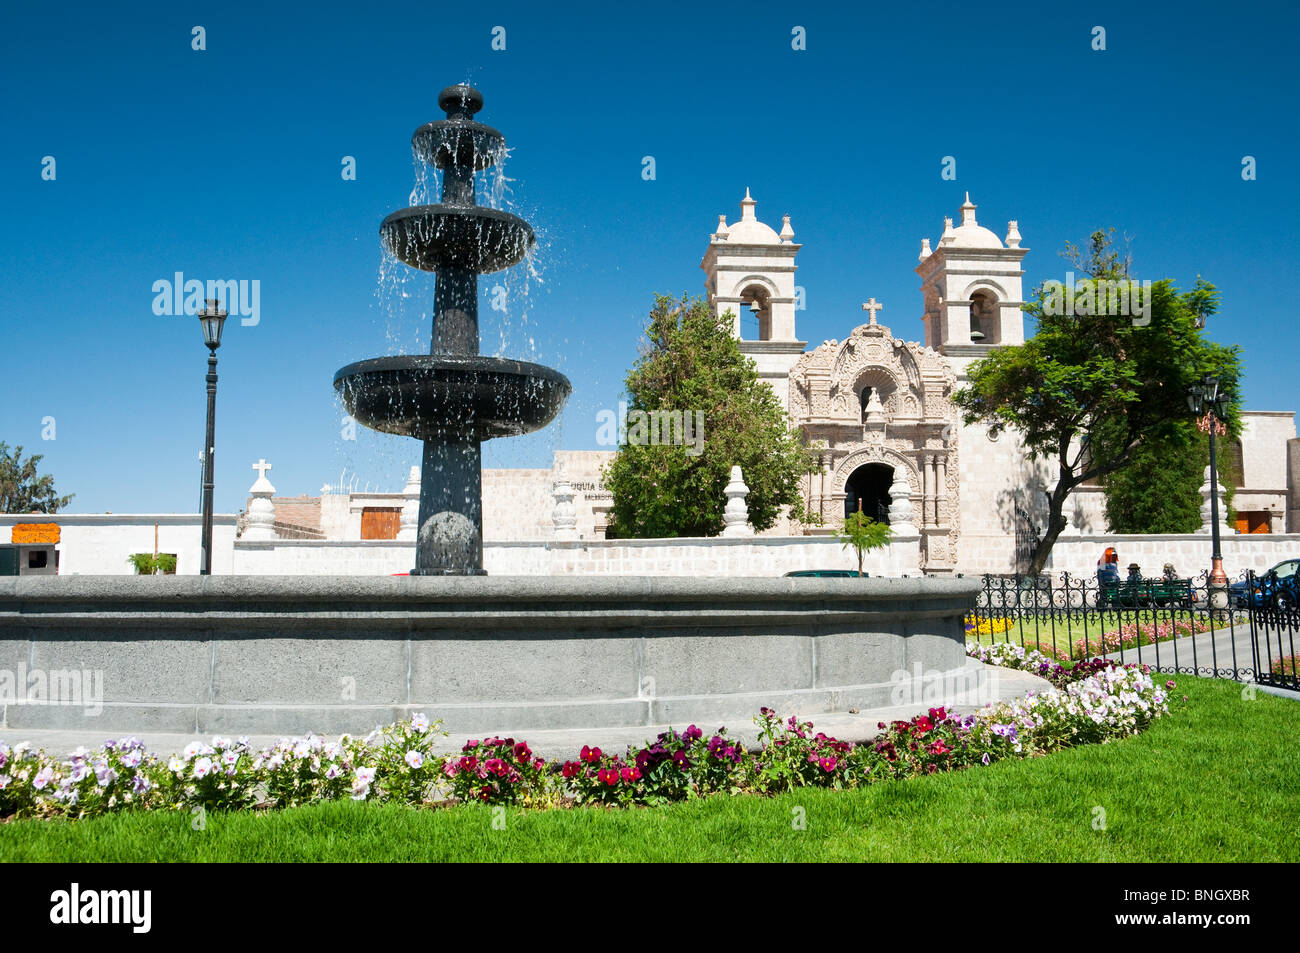 Exterior of the Cayma Church building in Arequipa, Peru. Stock Photo